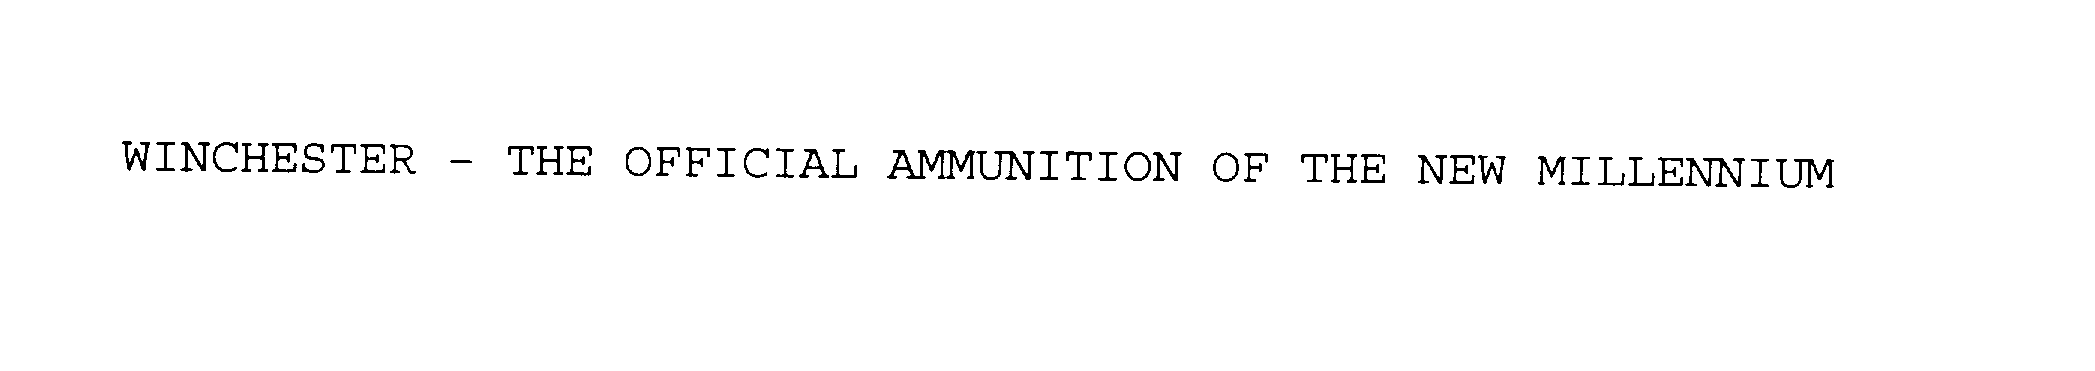  WINCHESTER - THE OFFICIAL AMMUNITION OF THE NEW MILLENNIUM